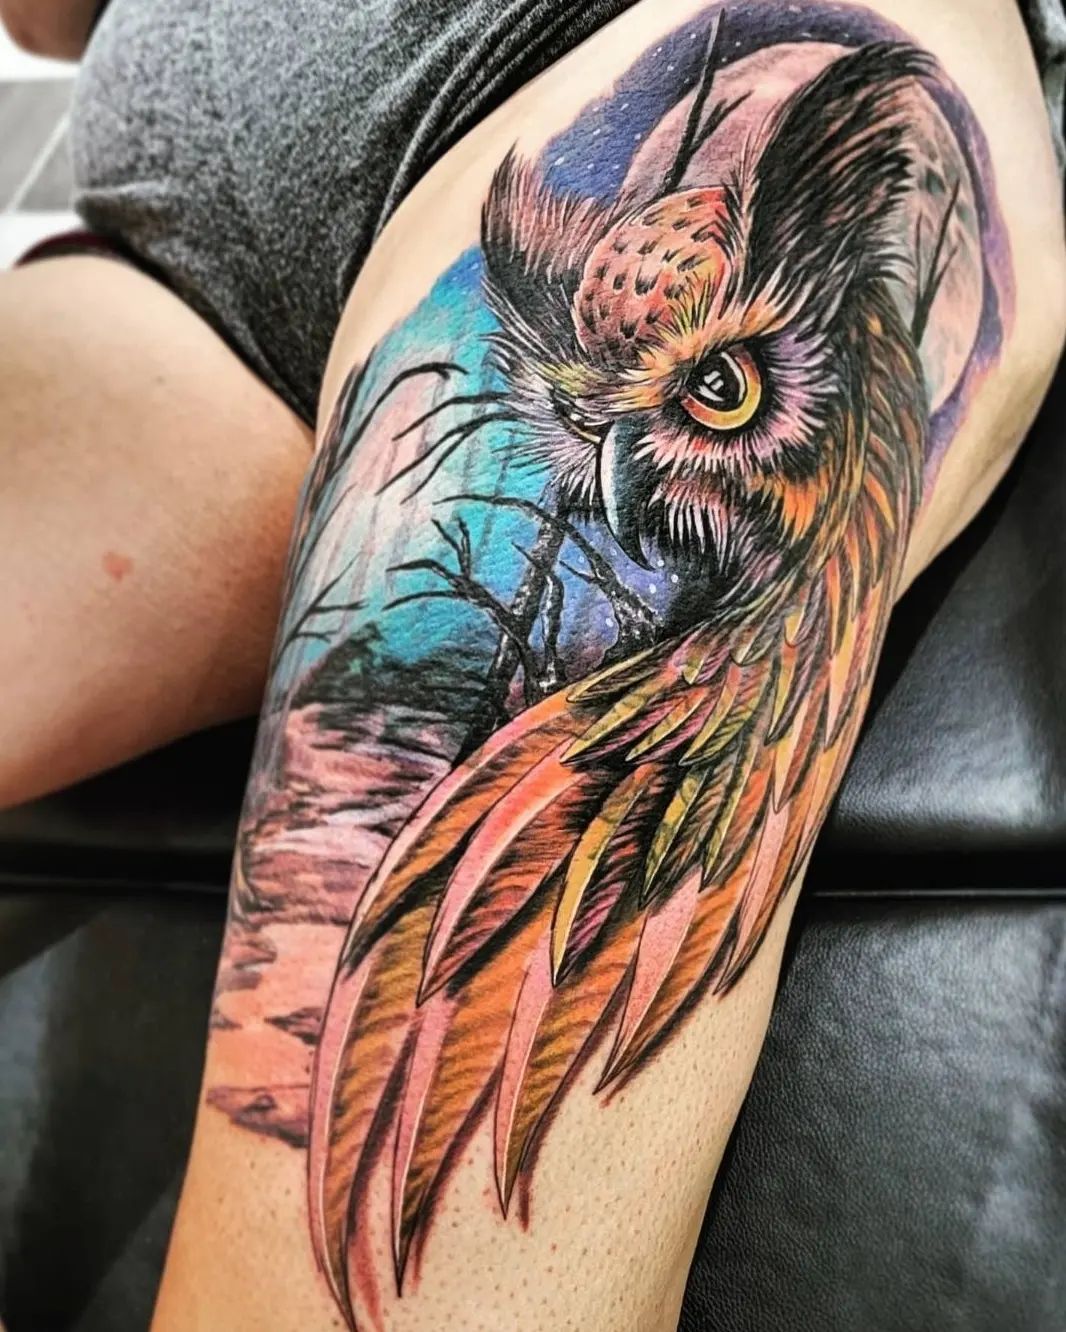 Owl Tattoos: 30+ Design Ideas, Meaning and Symbolism - 100 Tattoos